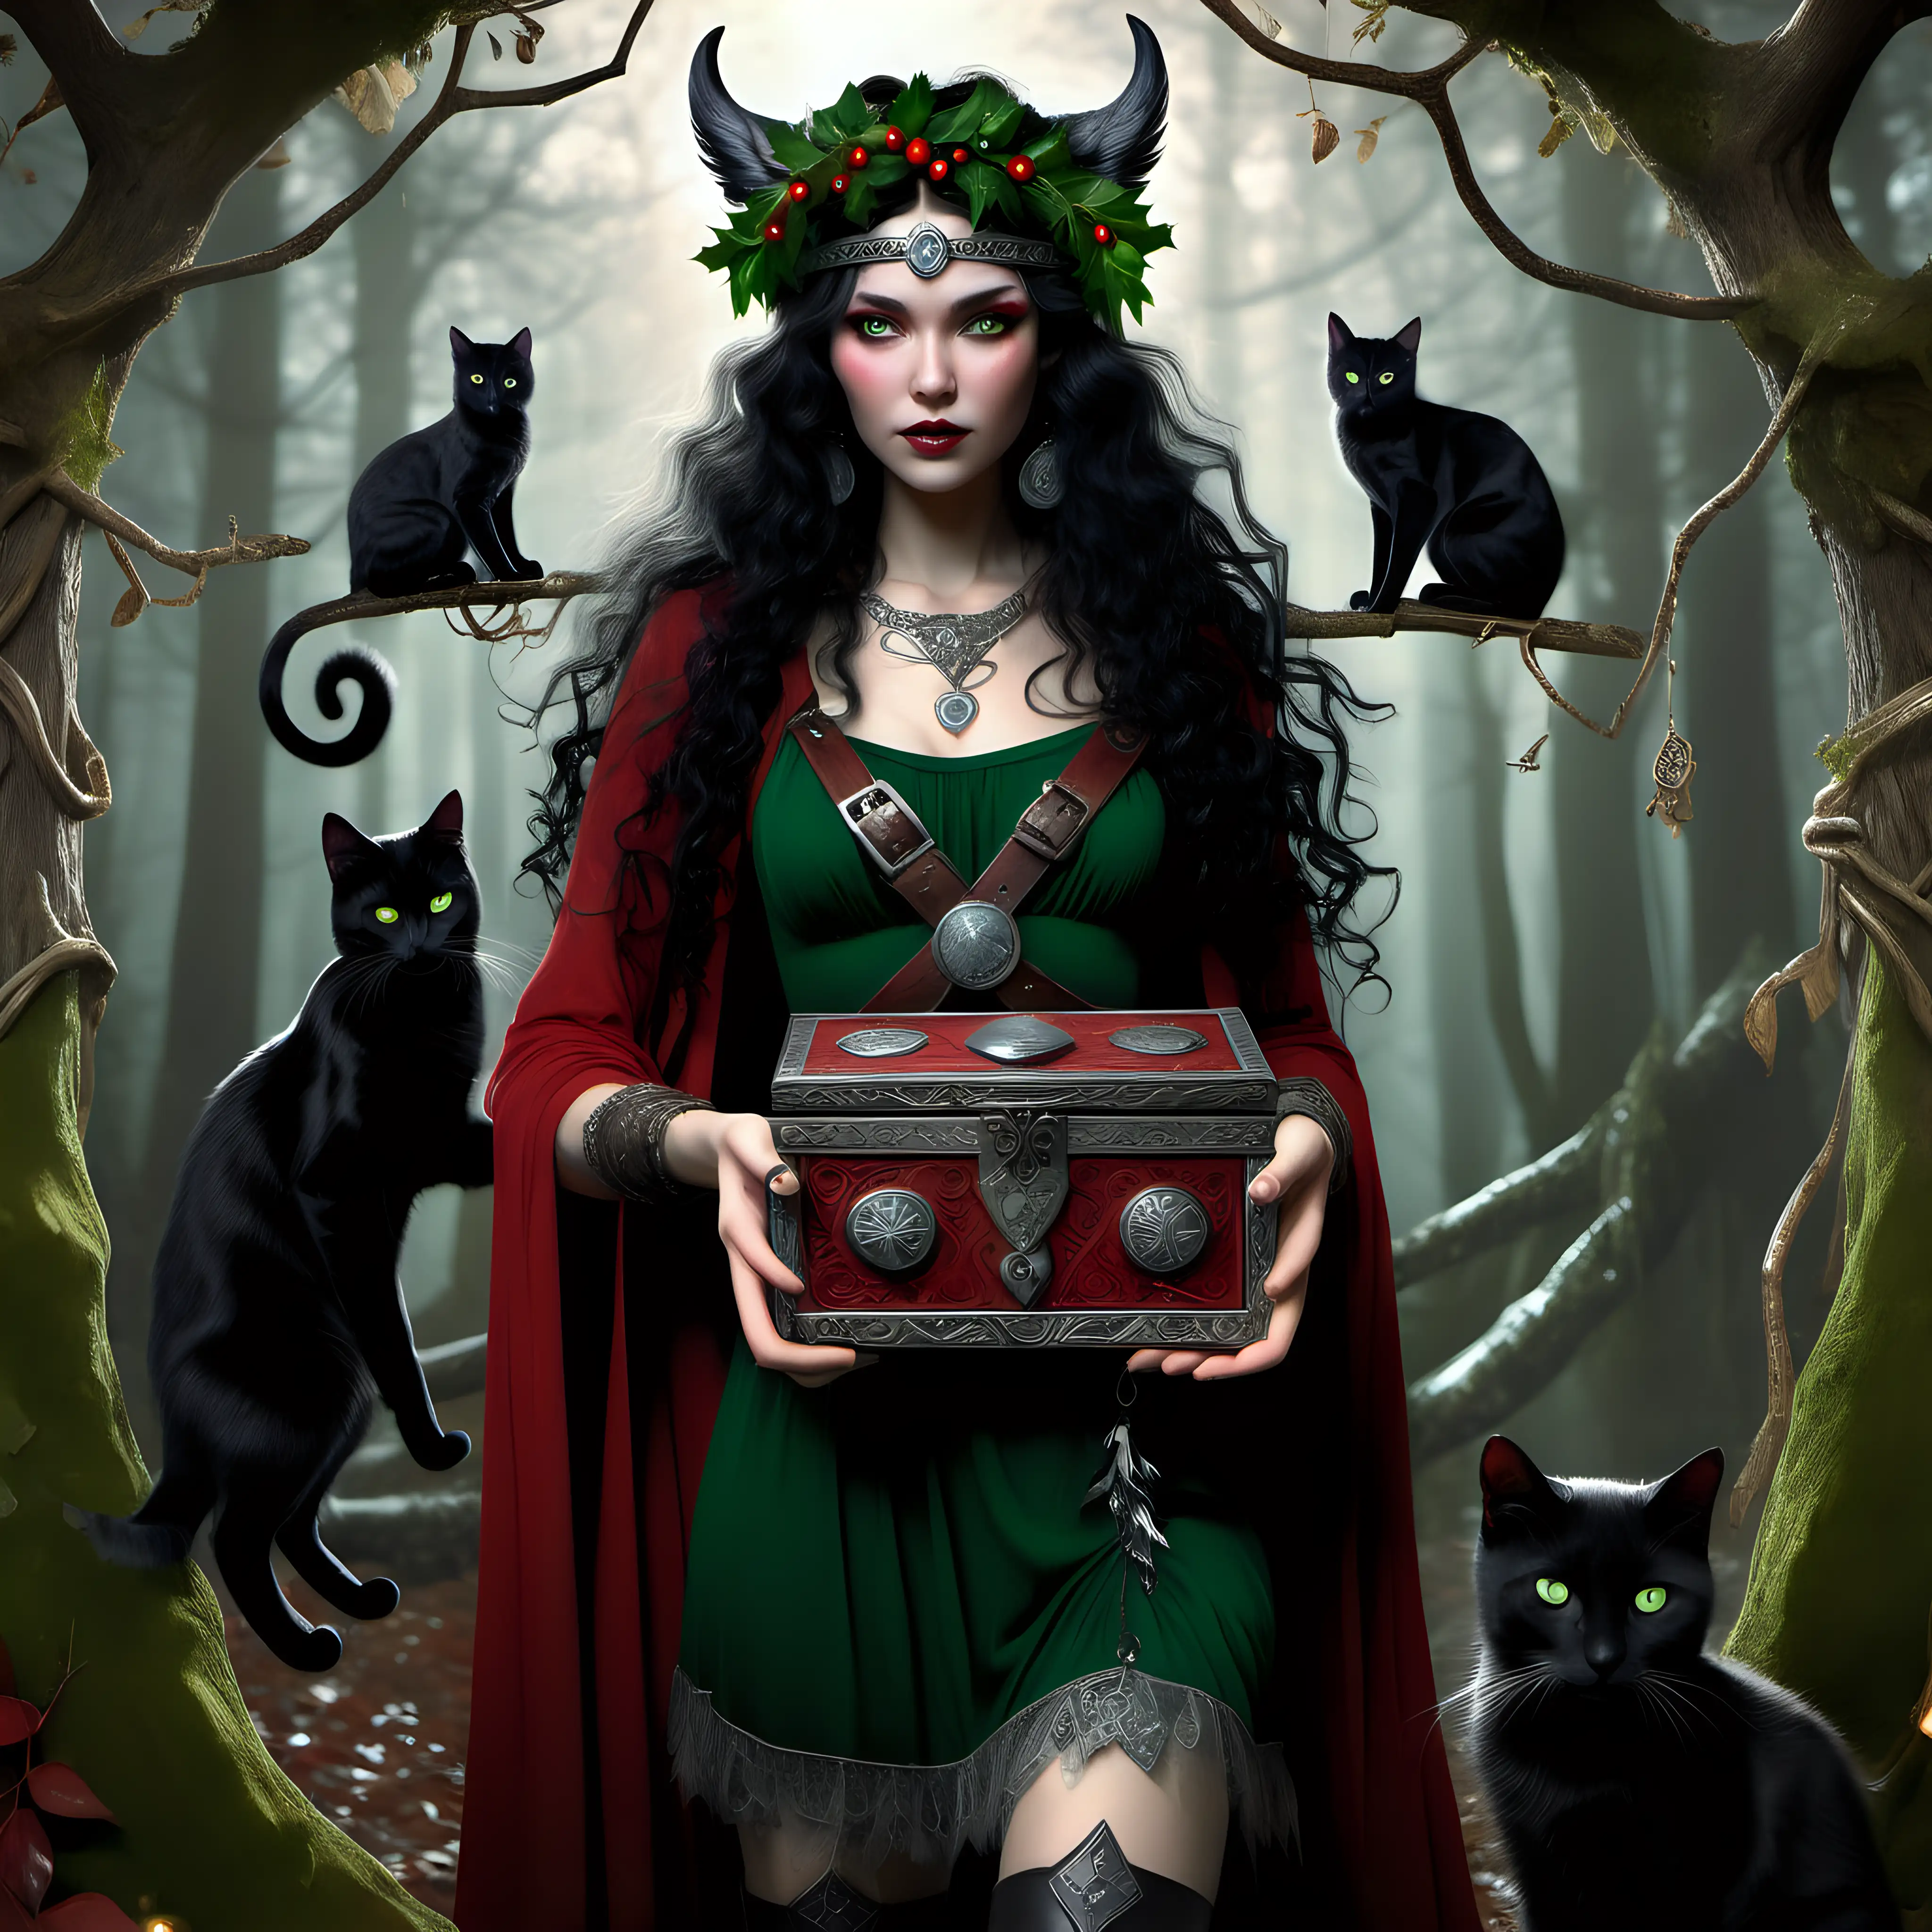 in a ancient forest there is a norse pagan woman with long black curly hair ,she has green eyes &  mascara & eyeliner, wearing a red velvet dress with a leather waistbag on a belt on the side with dangling jewelled feathers attached to the bag, she wears a  headdress of green holly leaves & mistletoe berries on her head , she has in her hands an ancient wooden box with viking symbols all around the box & silver filligree corners the lid of the box is open & mystical fairy dust is emitting from within the box, she is wearing long  laced up black boots, standing beside her one on each side are two large black cats,